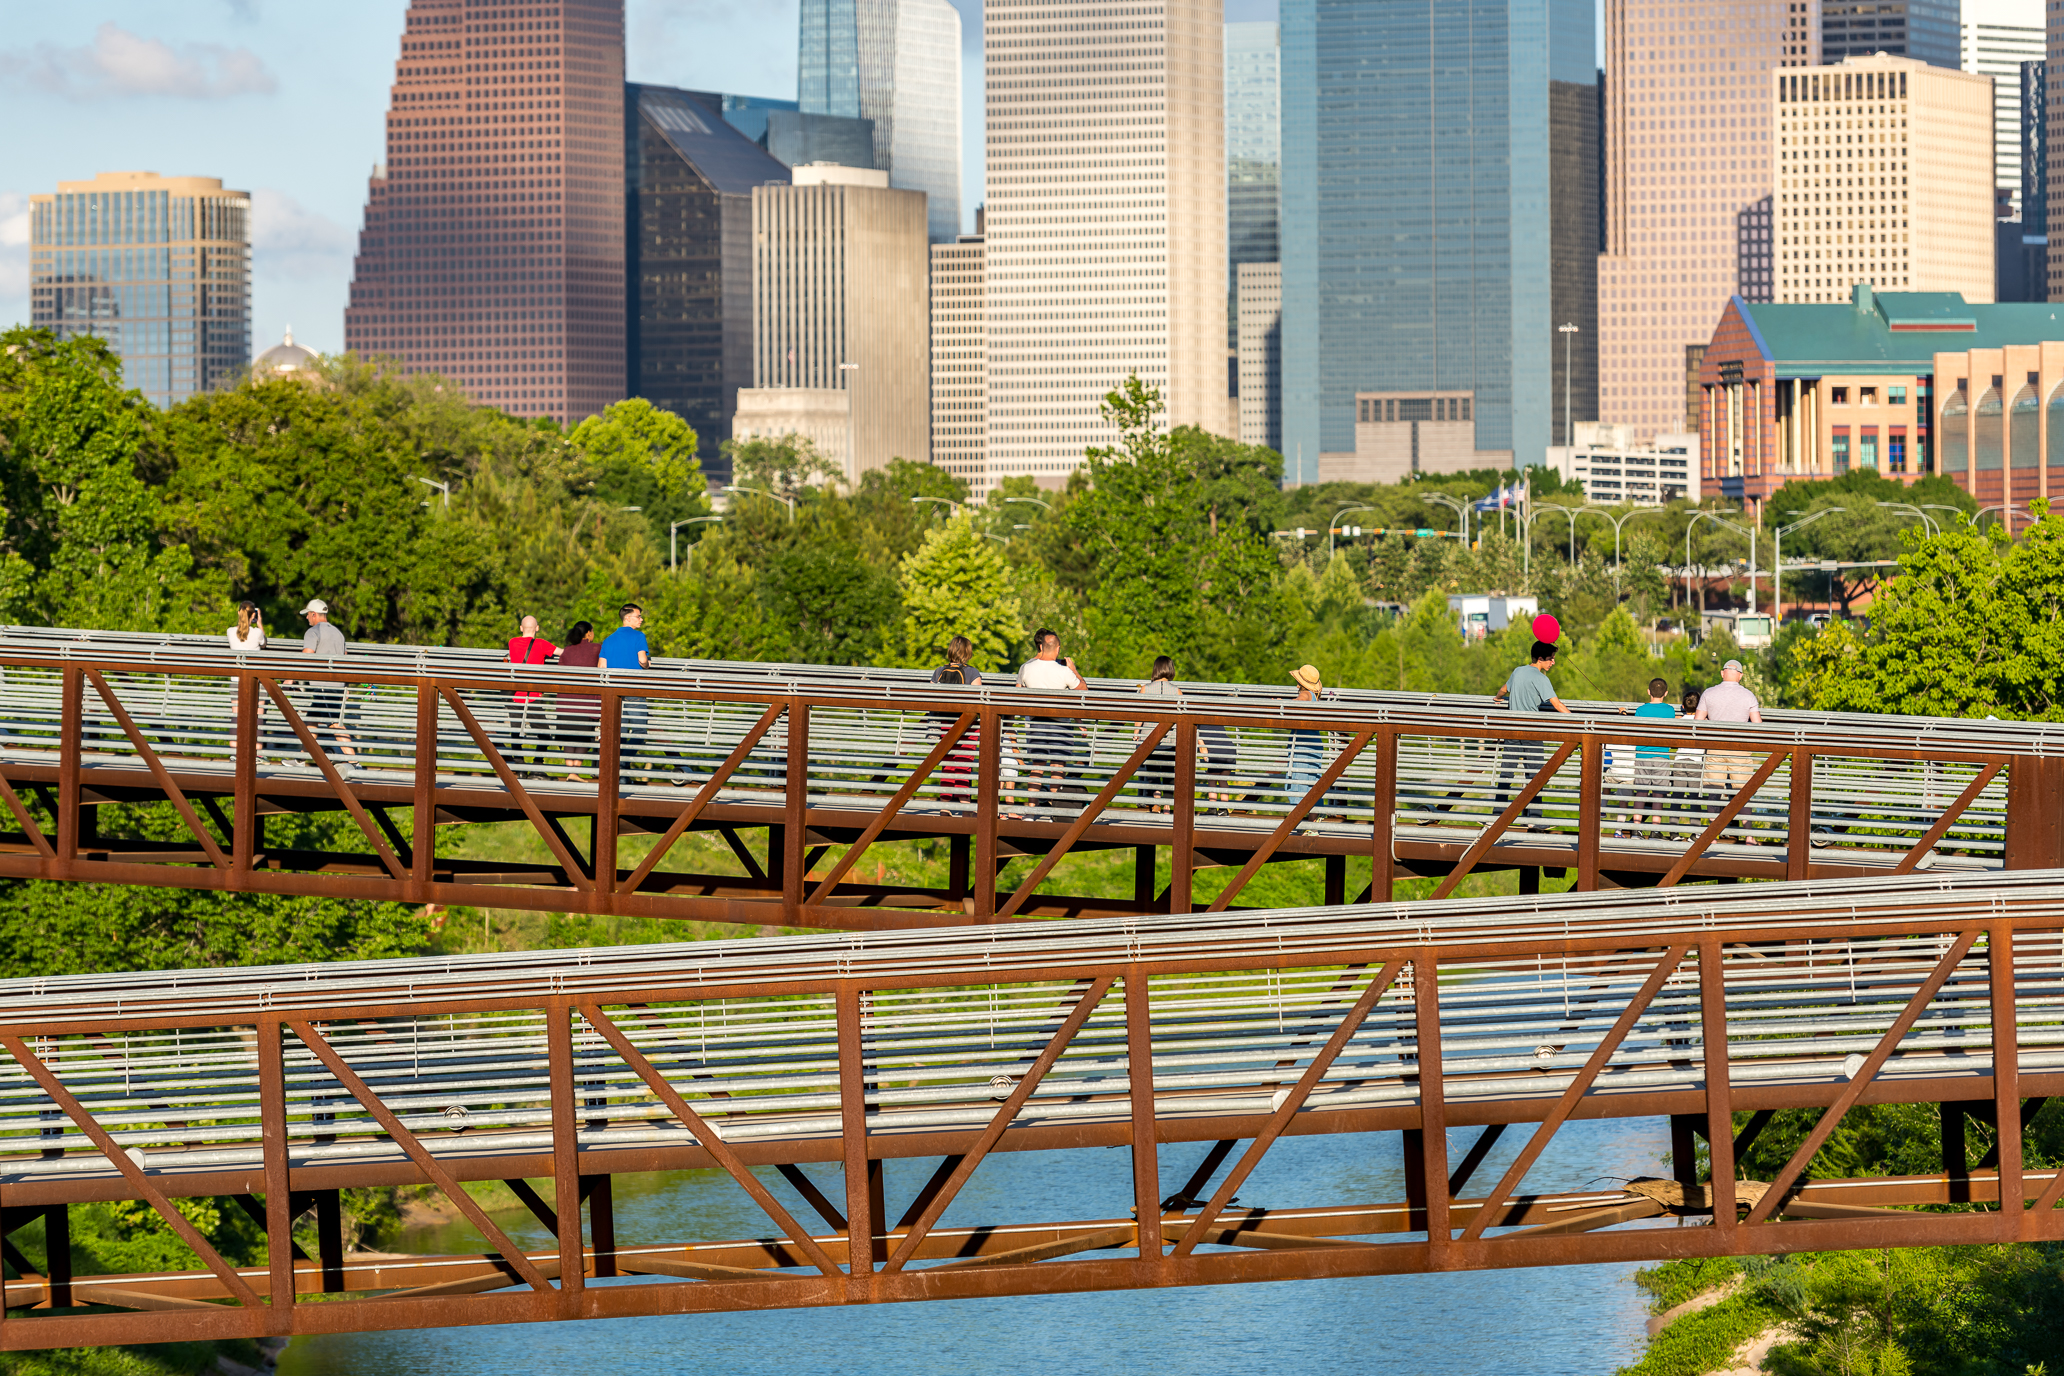 Houston Population Expected to Exceed 7.1 Million by 2020